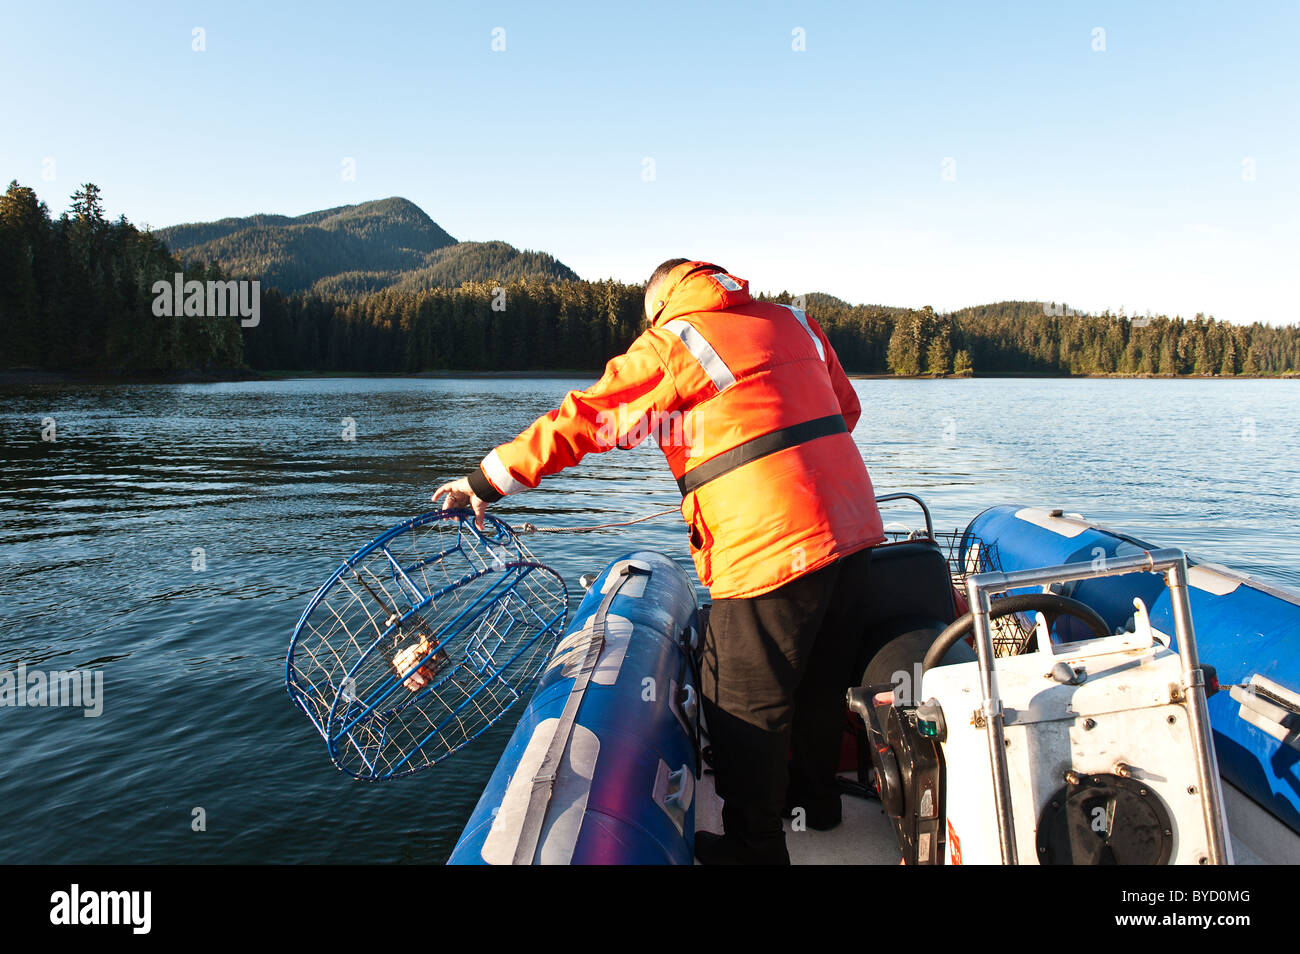 Crab fishing, Windham Bay, Chuck River Wilderness Area, Tongass National Forest, Inside Passage, Southeast Alaska. Stock Photo